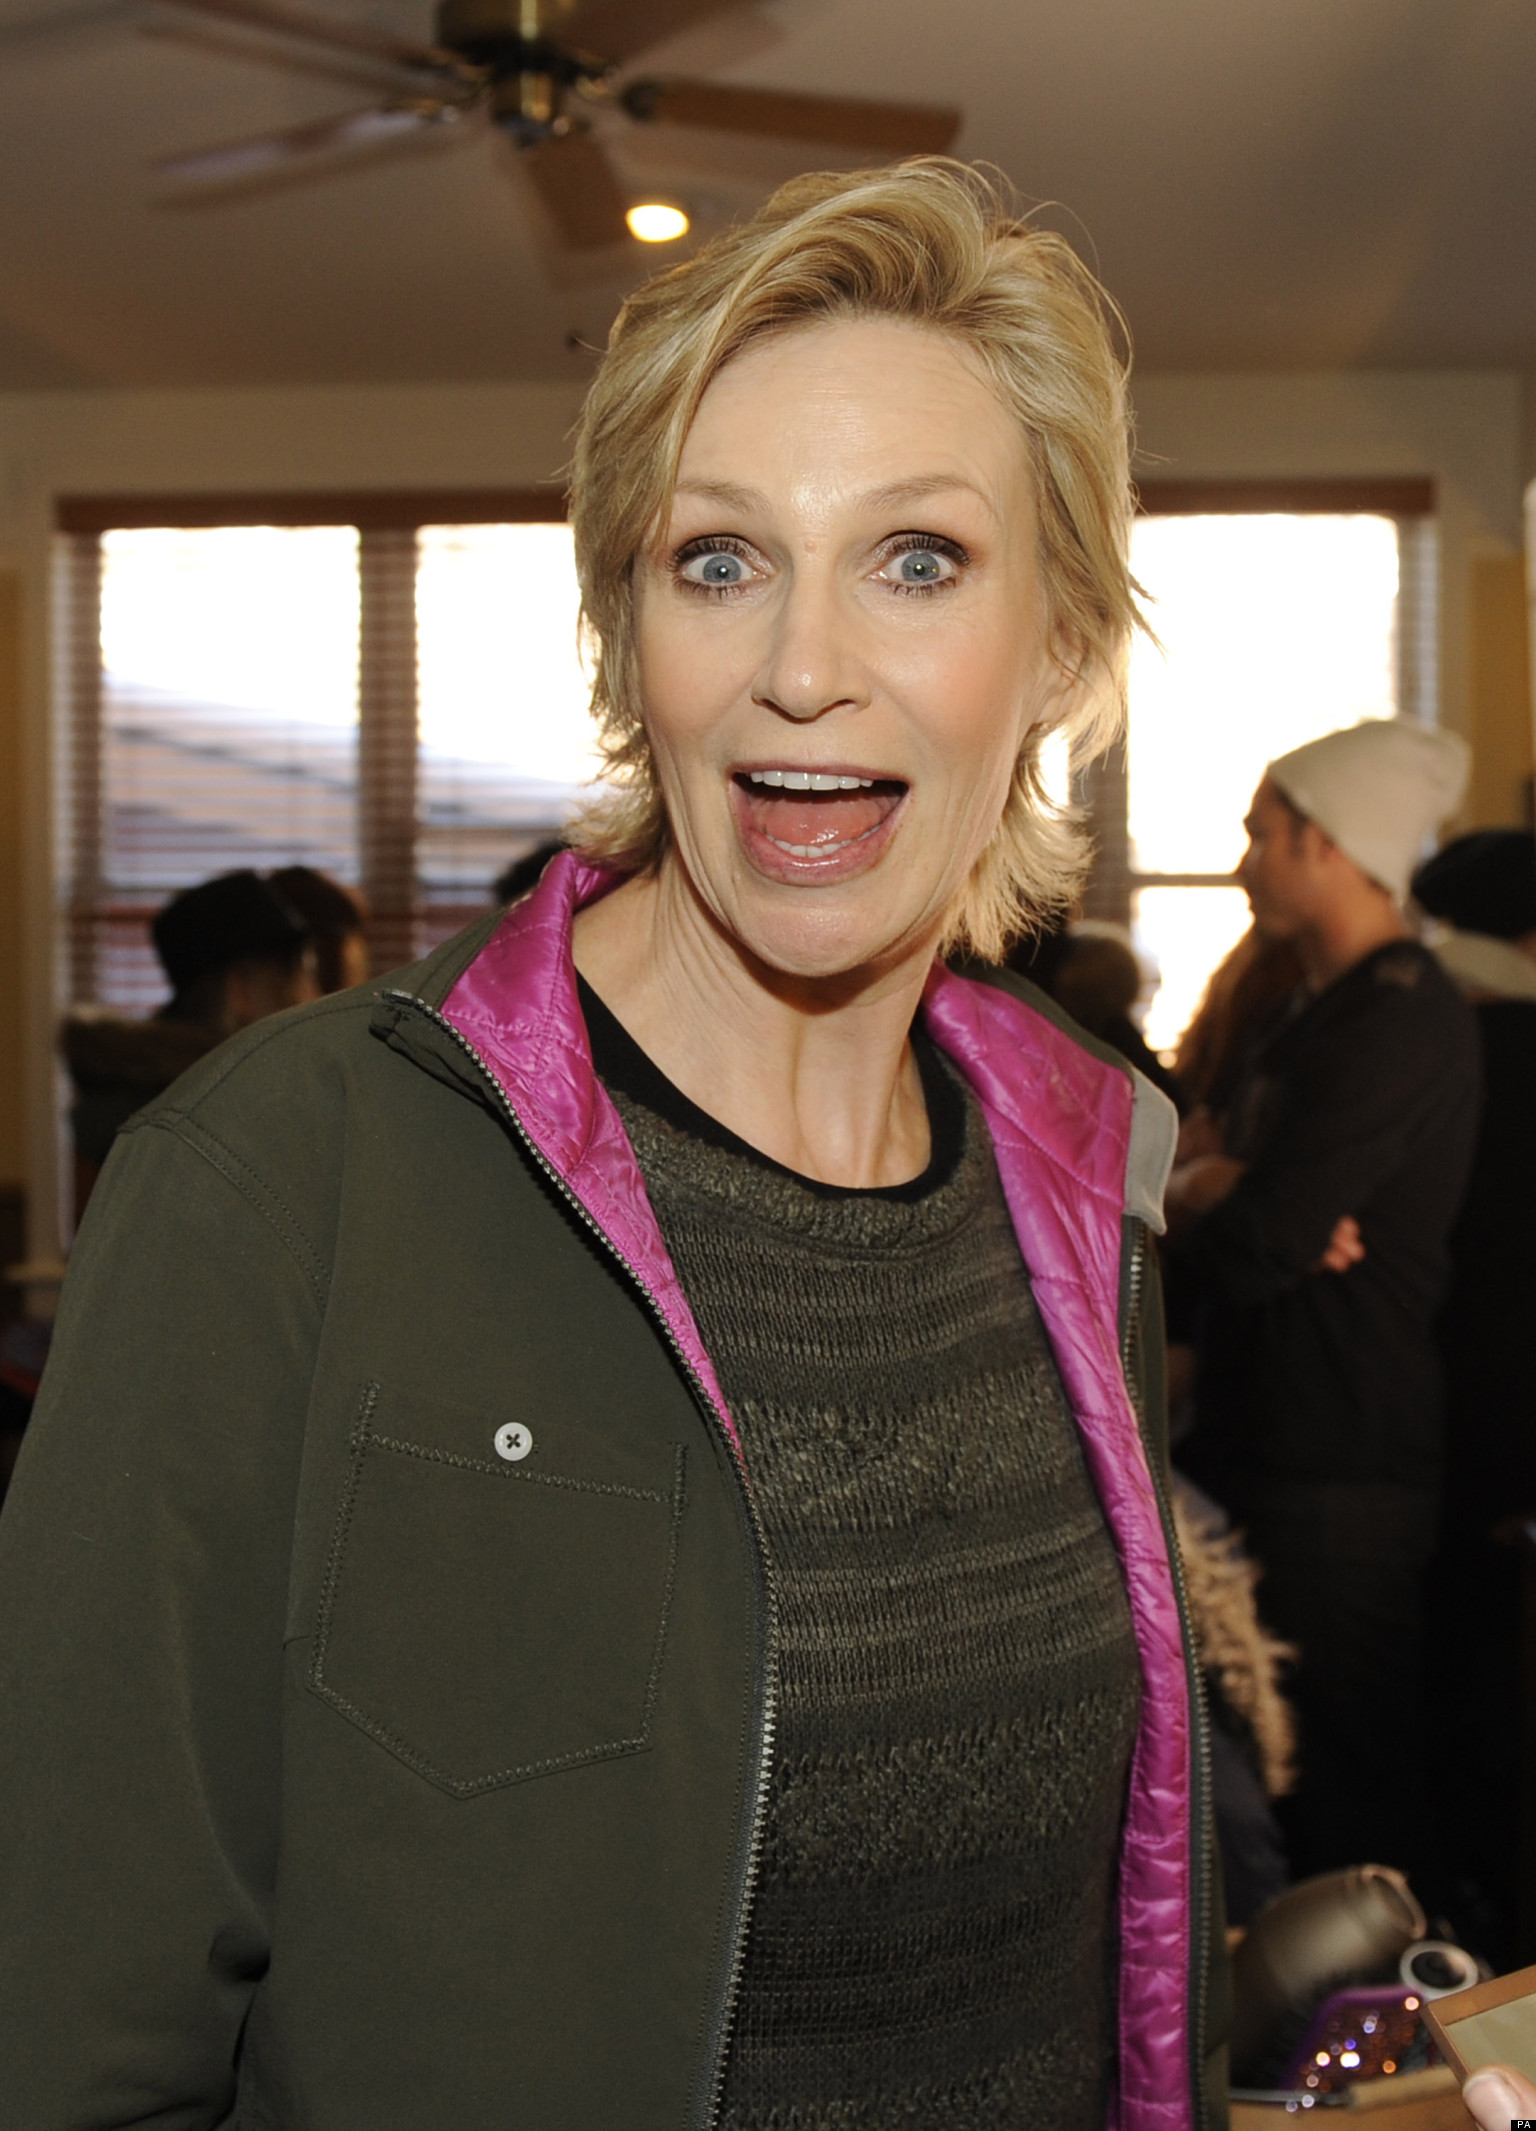 #39 Glee #39 Star Jane Lynch On Her #39 Wreck It Ralph #39 Character Sergeant